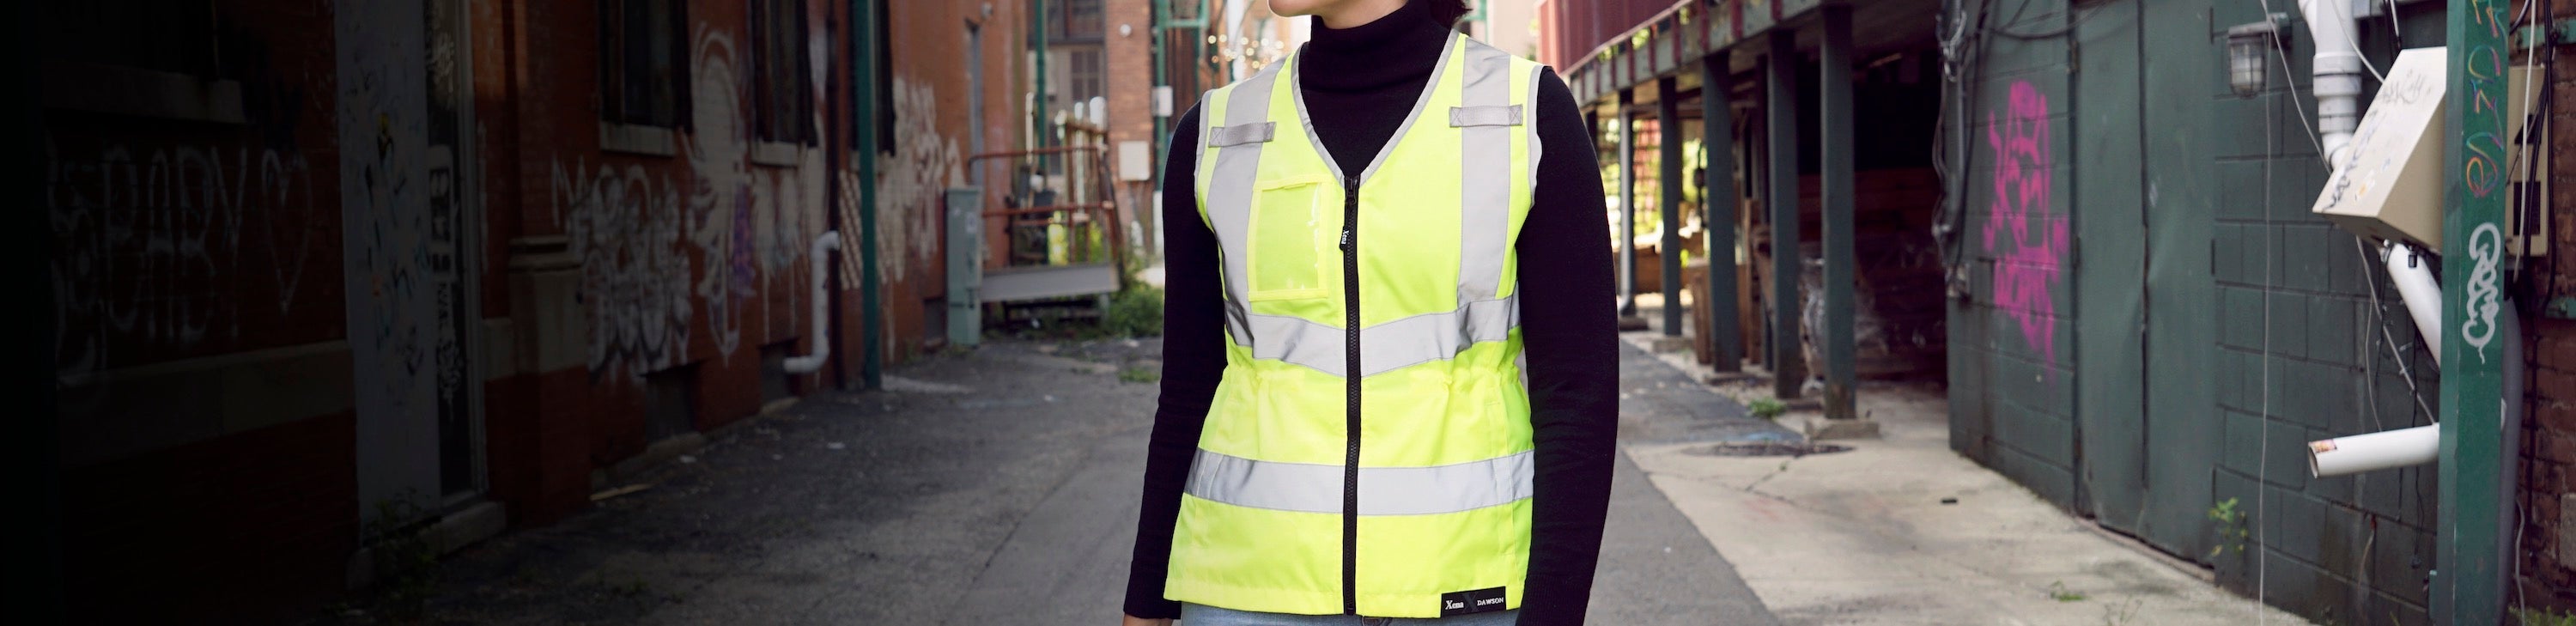 Xena Women's Work Apparel and Swag Collection Features Utility Blazers, High-Vis Vests, Insole, Sweatshirt, Shirts, Beanies, and Gift Cards